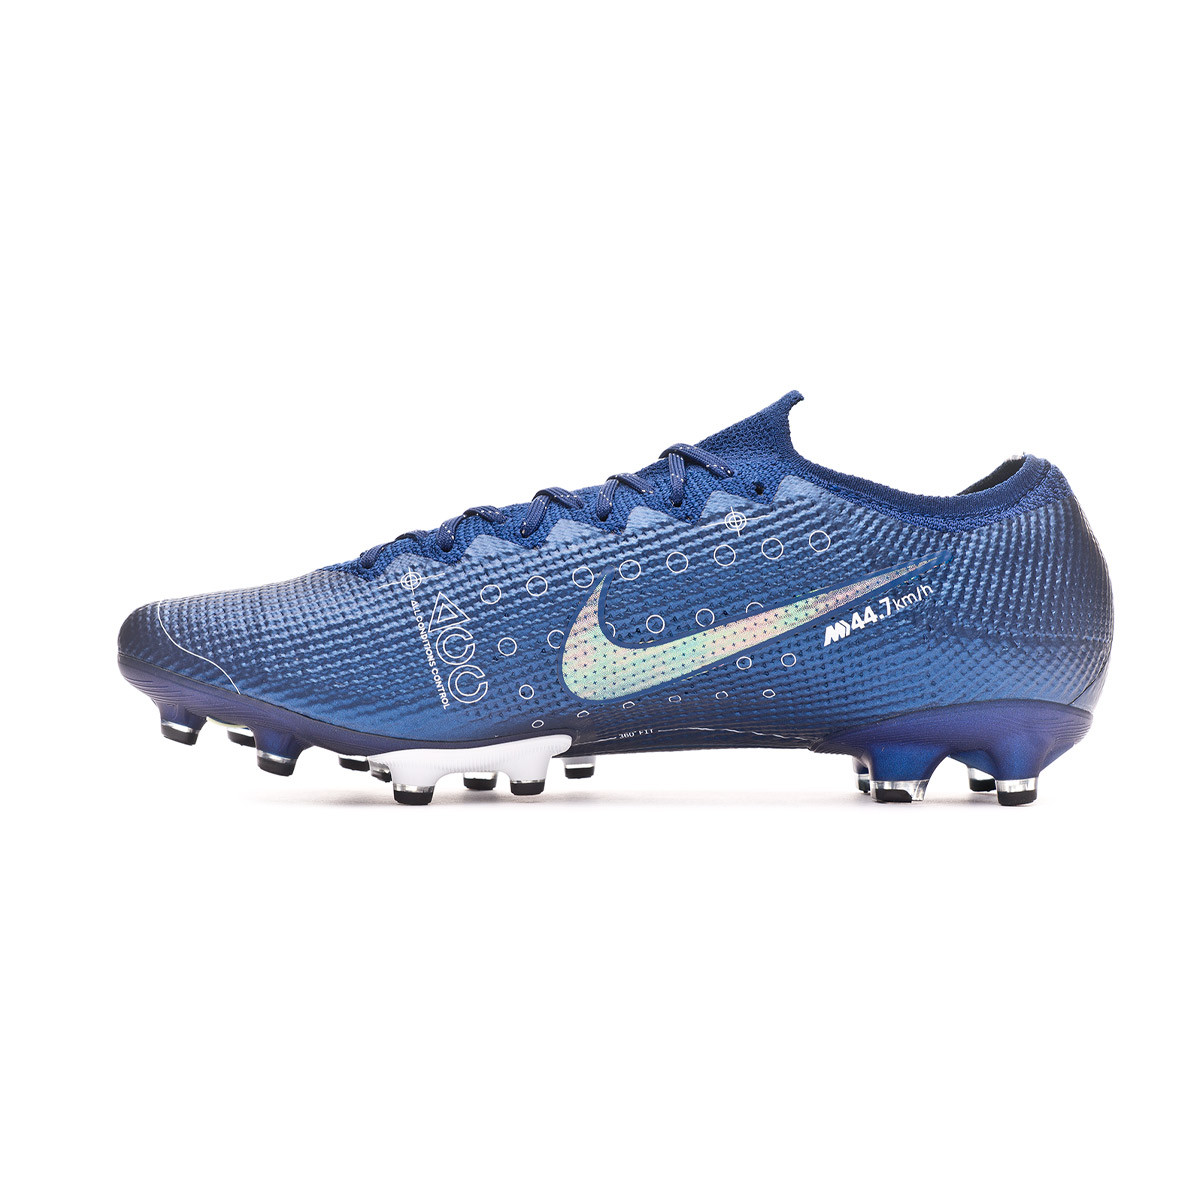 Best price for Nike Mercurial Vapor 13 Pro MDS 2 AG Pro.